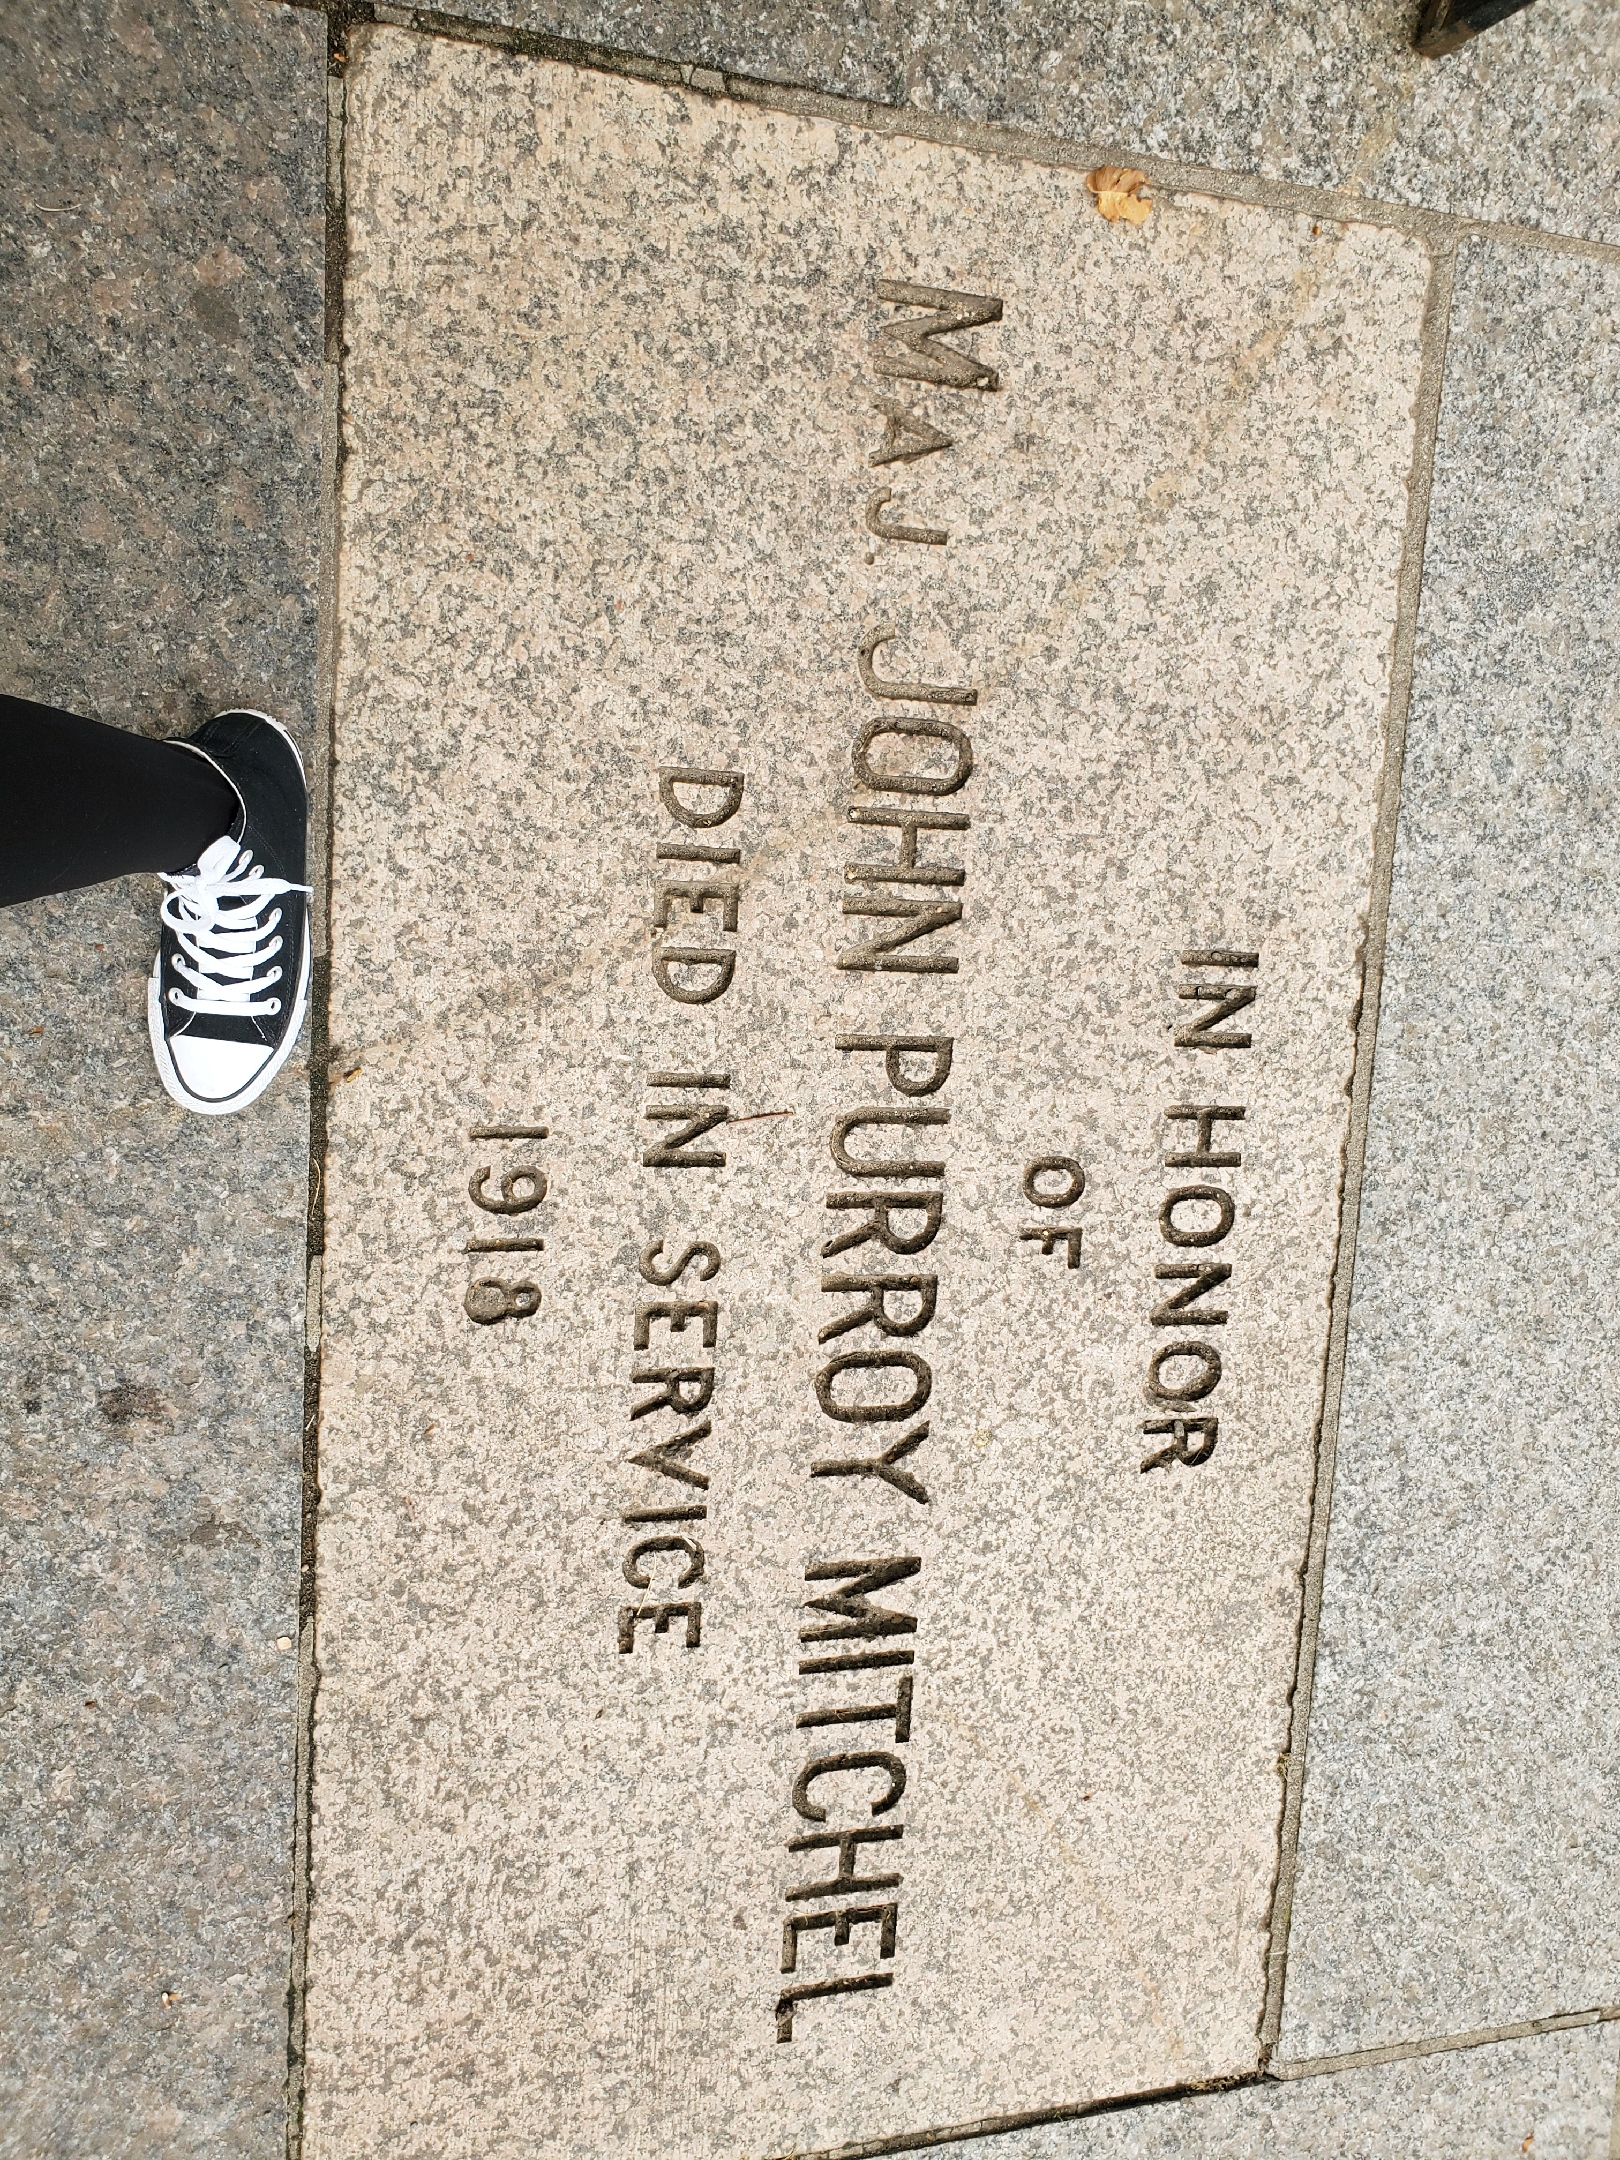 The plaque, with a foot for reference